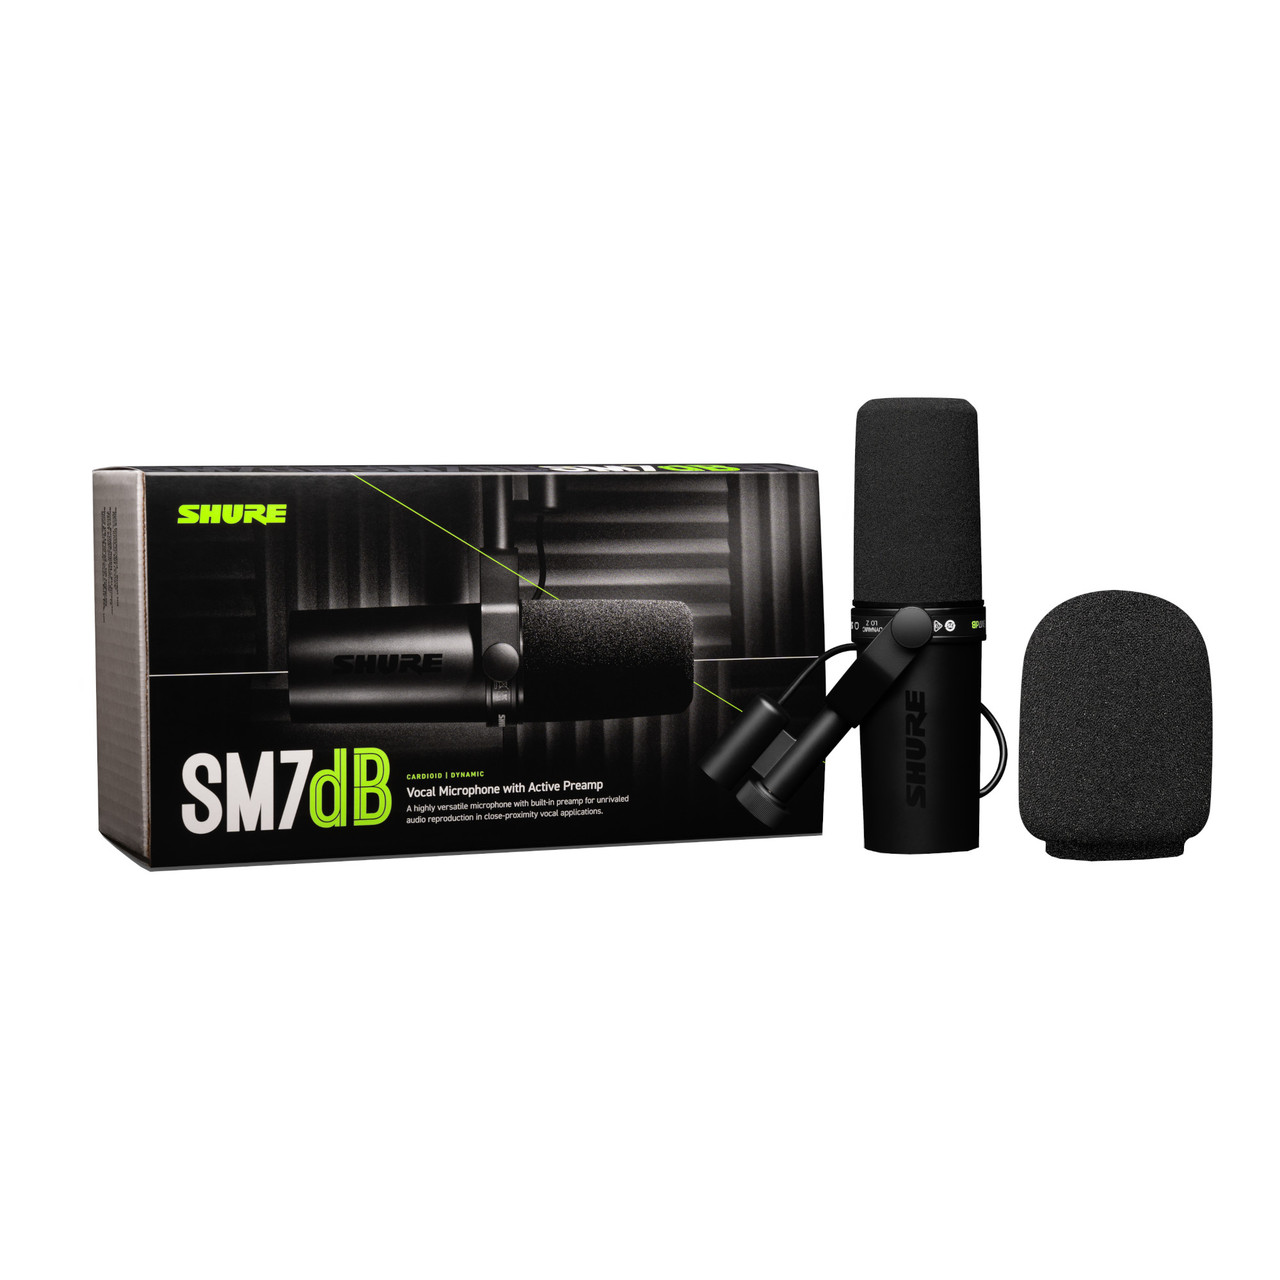 Shure SM7dB Dynamic Vocal Microphone w/Built-In Preamp